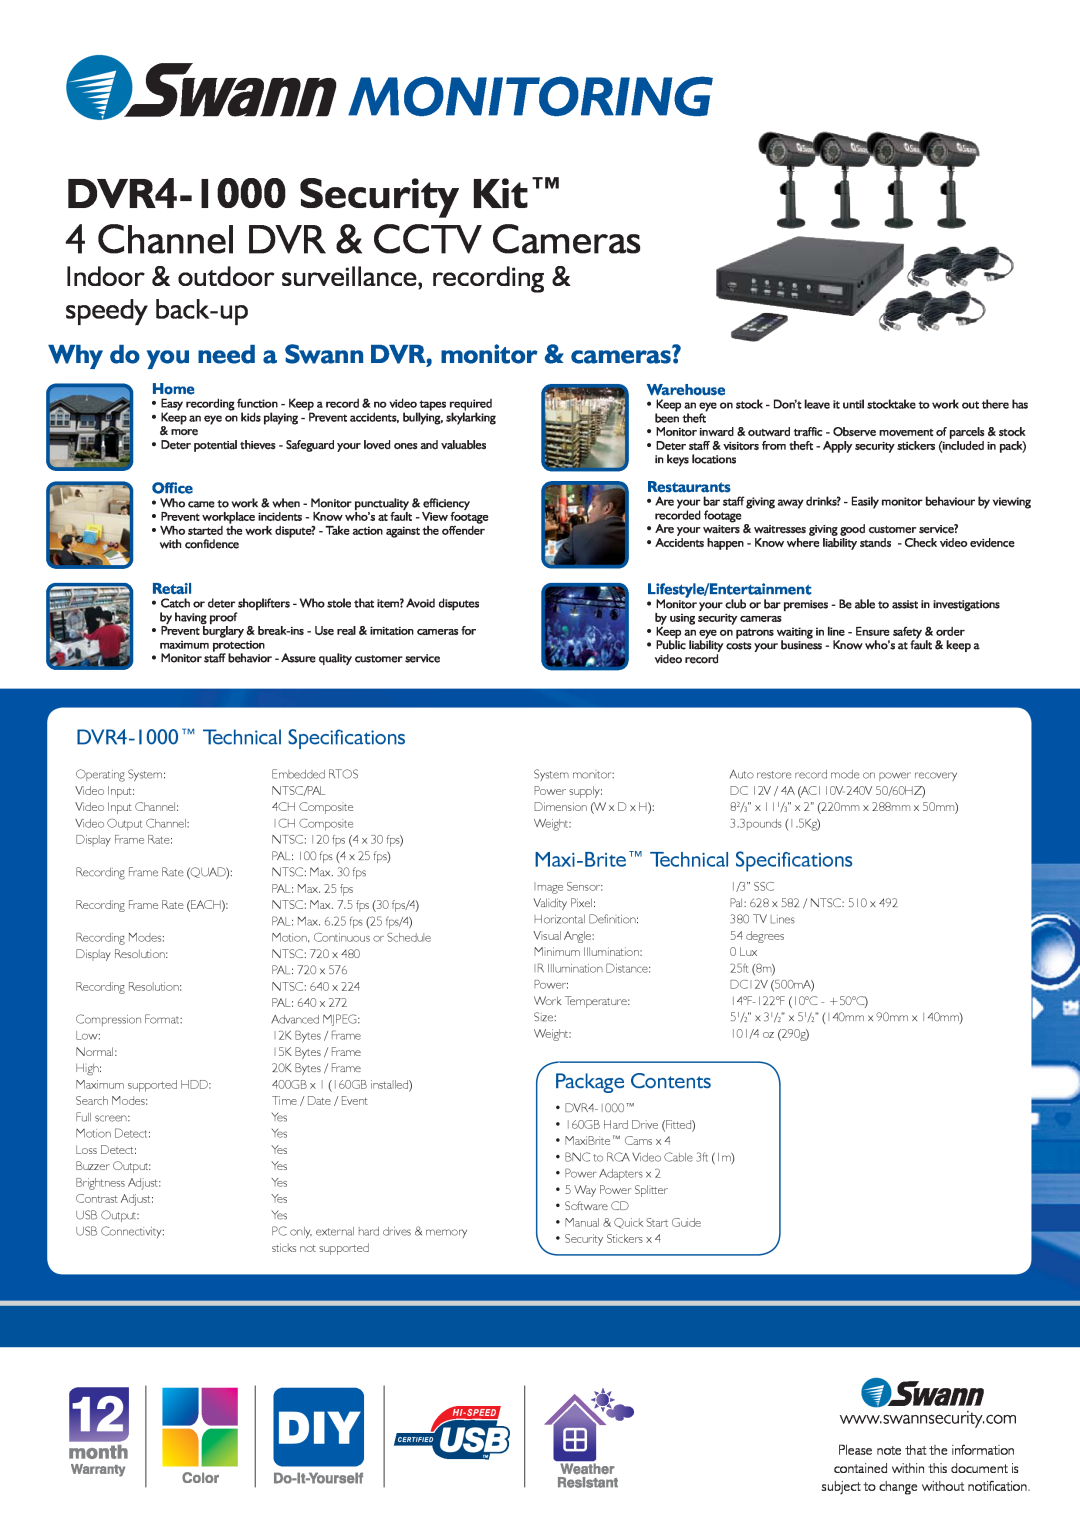 Swann Monitoring, DVR4-1000 Security Kit, Channel DVR & CCTV Cameras, Why do you need a Swann DVR, monitor & cameras? 